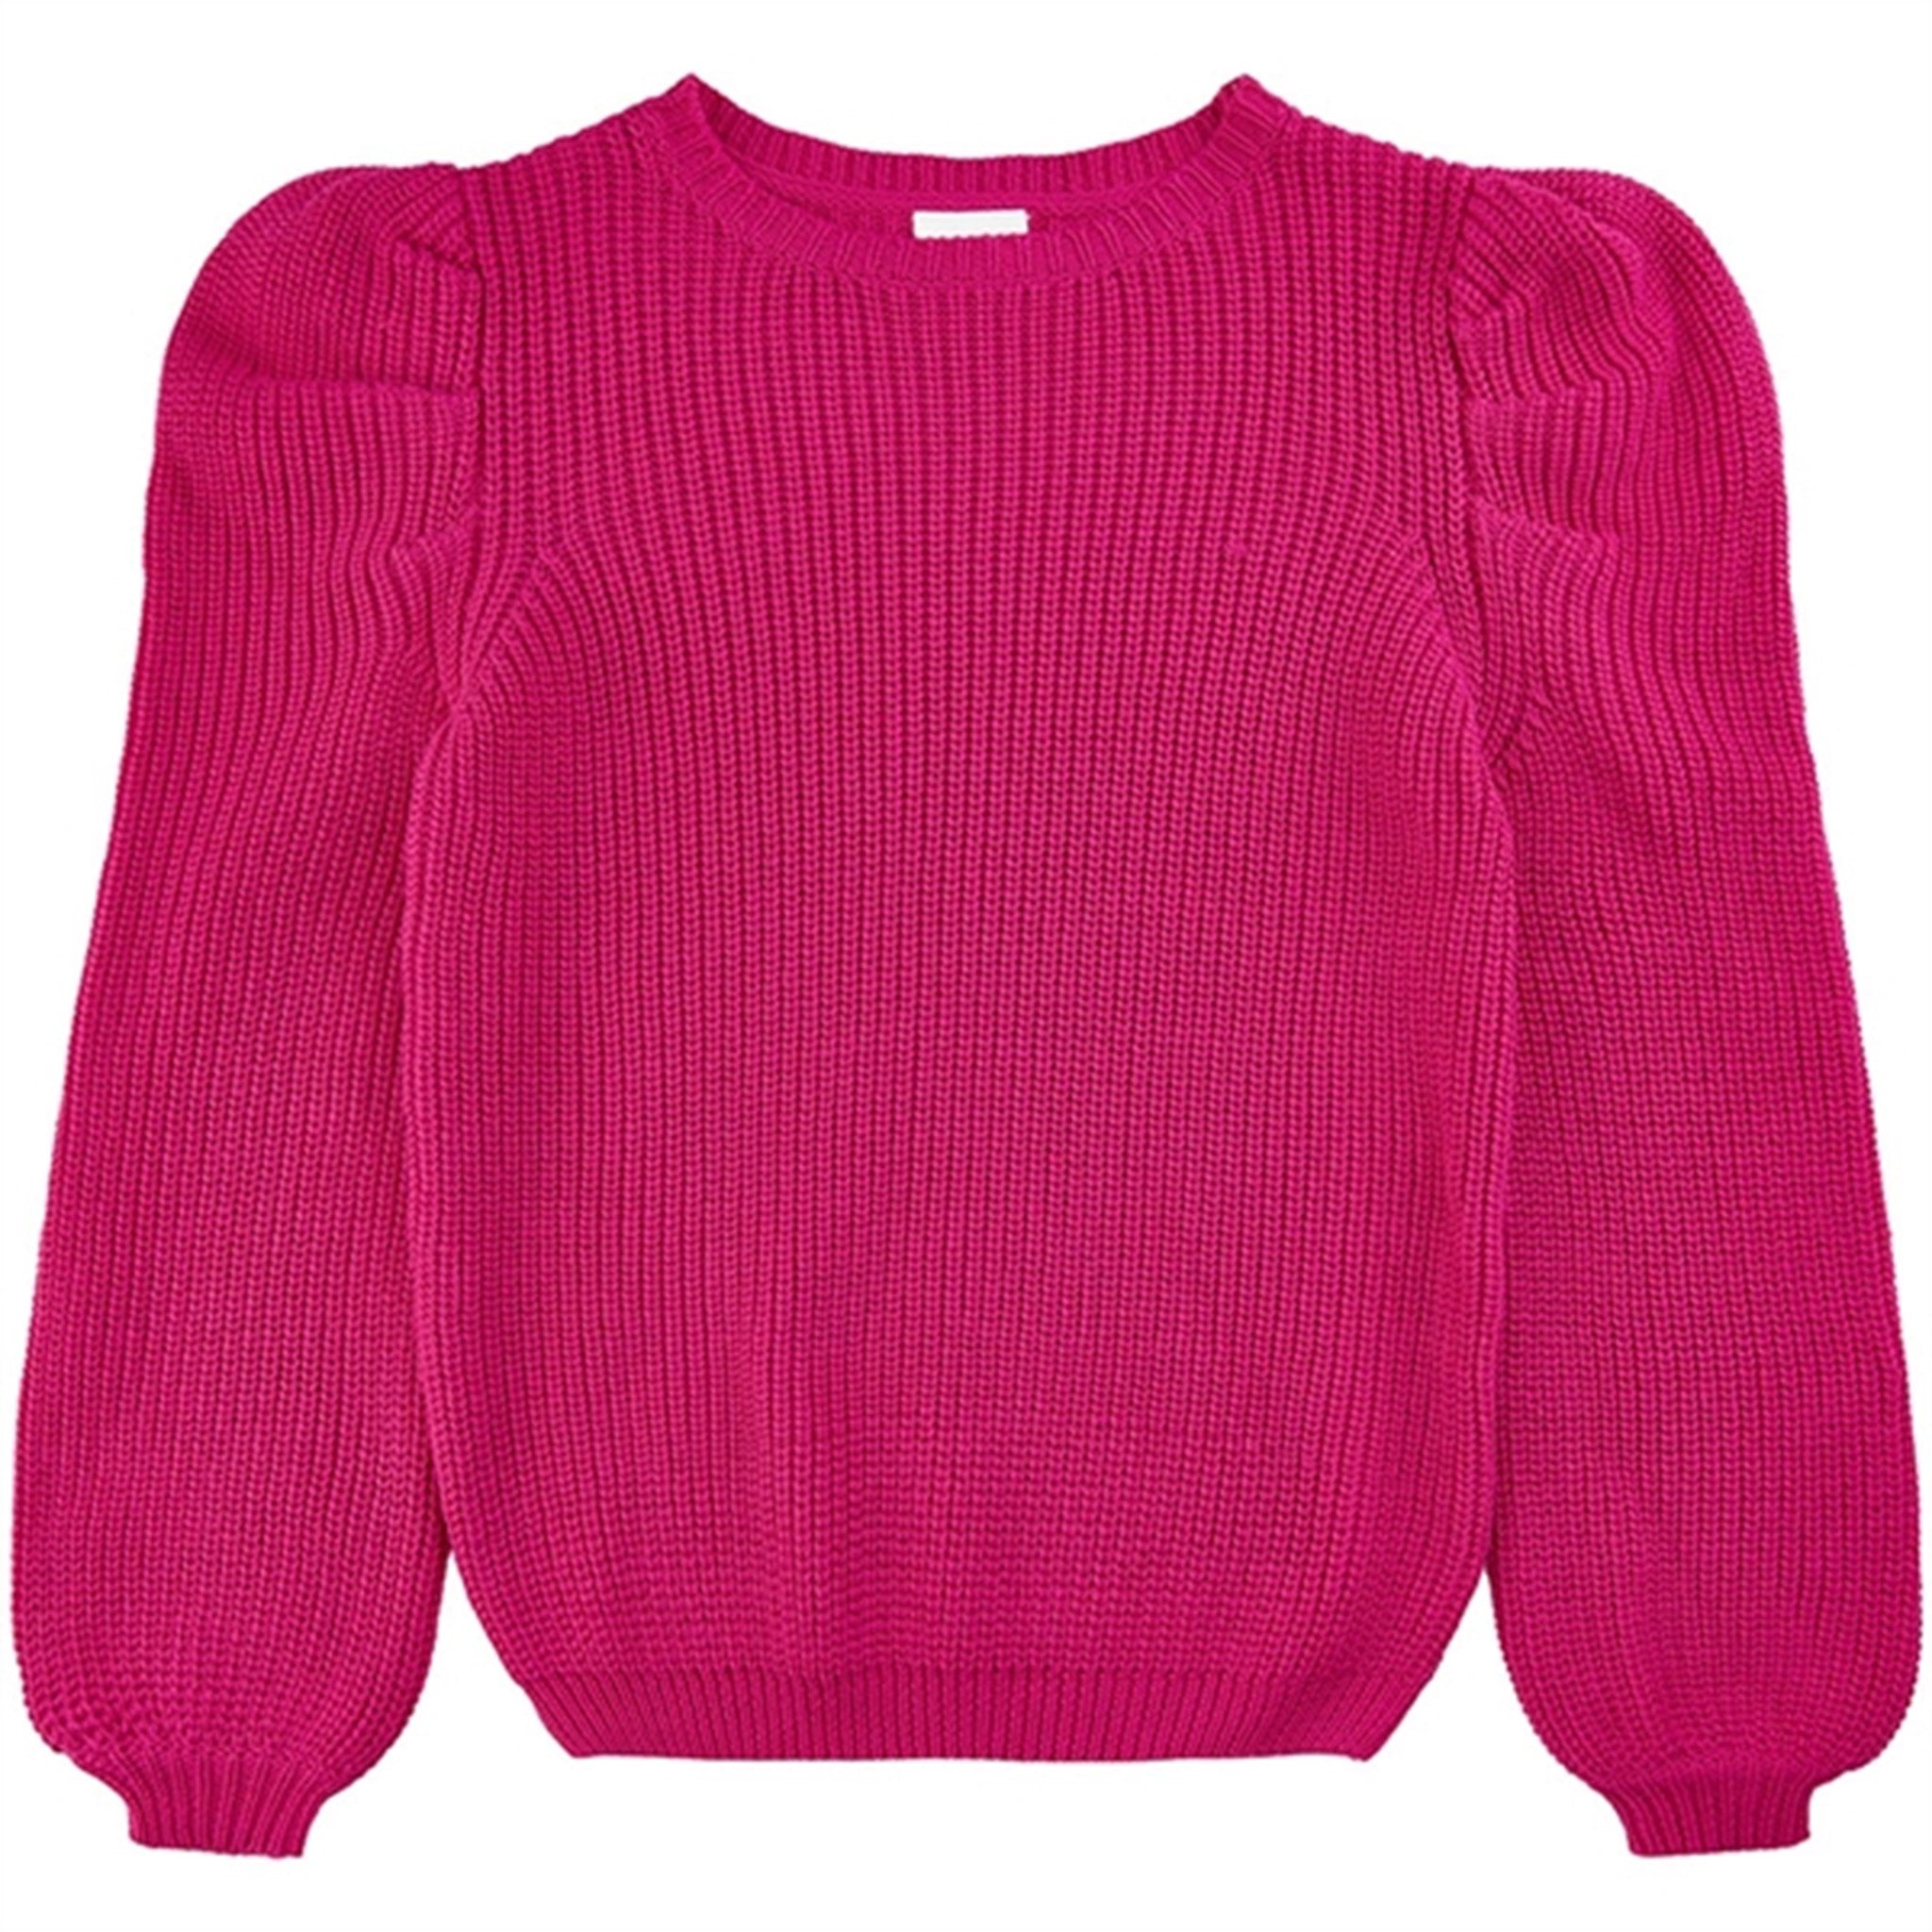 The New Magenta Adaley Knit